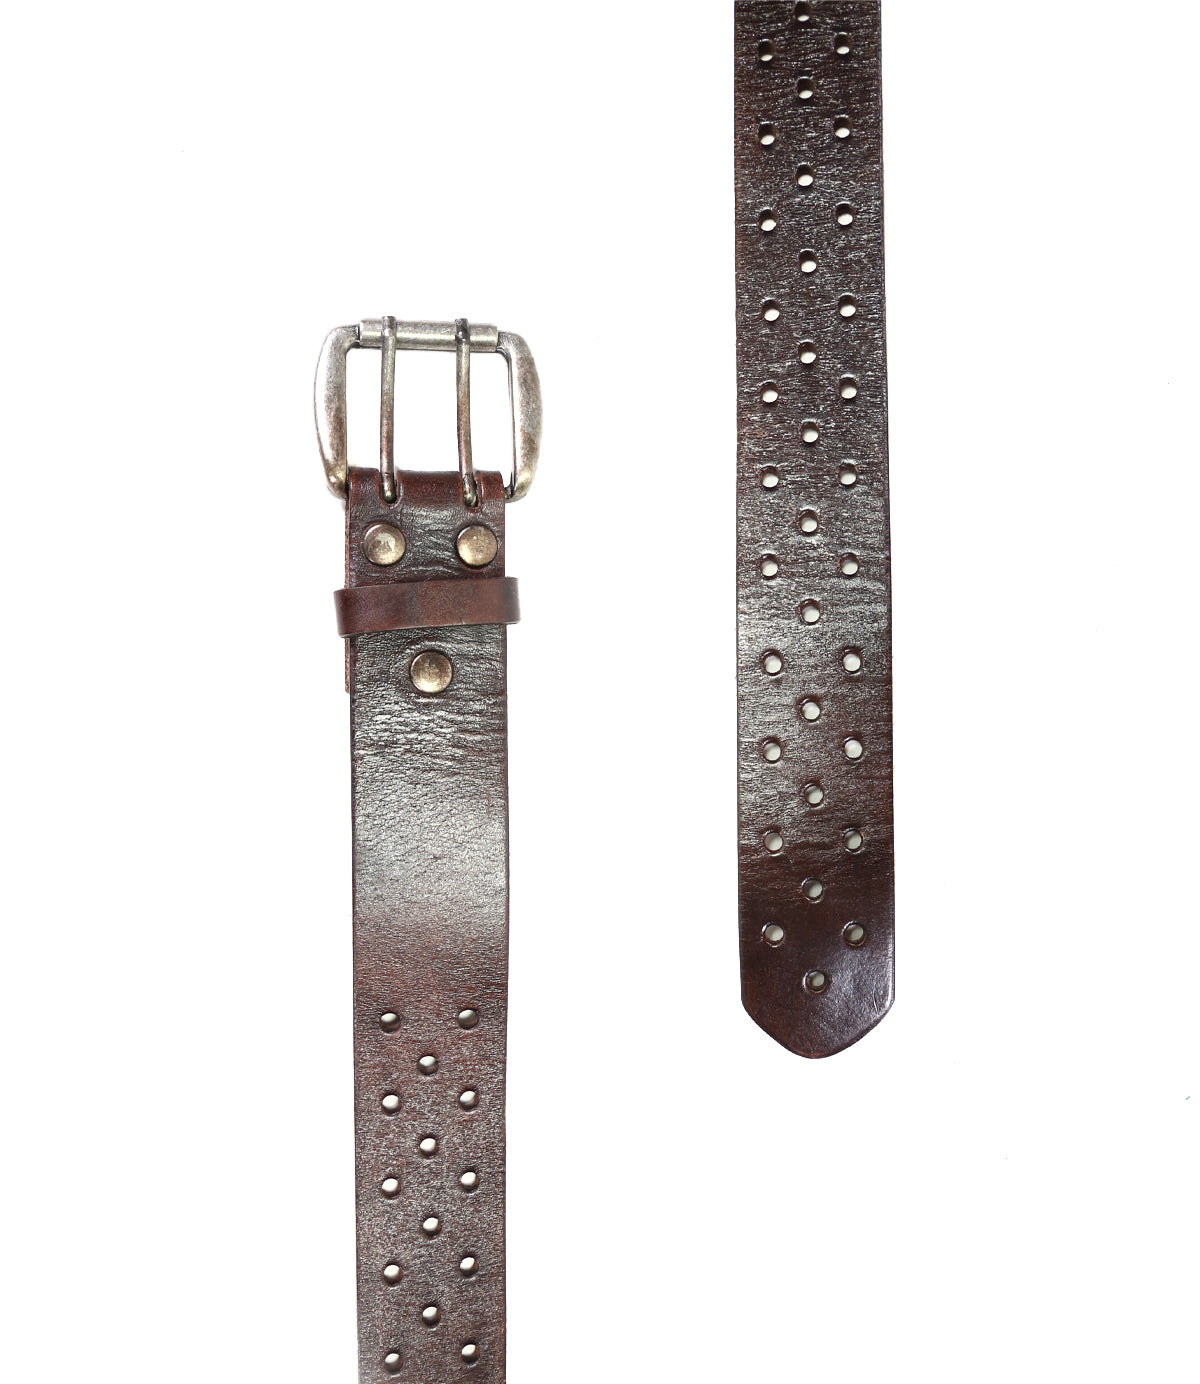 Two Mccoy vegetable-tanned leather belts with metal studs, one buckled, isolated on a white background by Bed Stu.